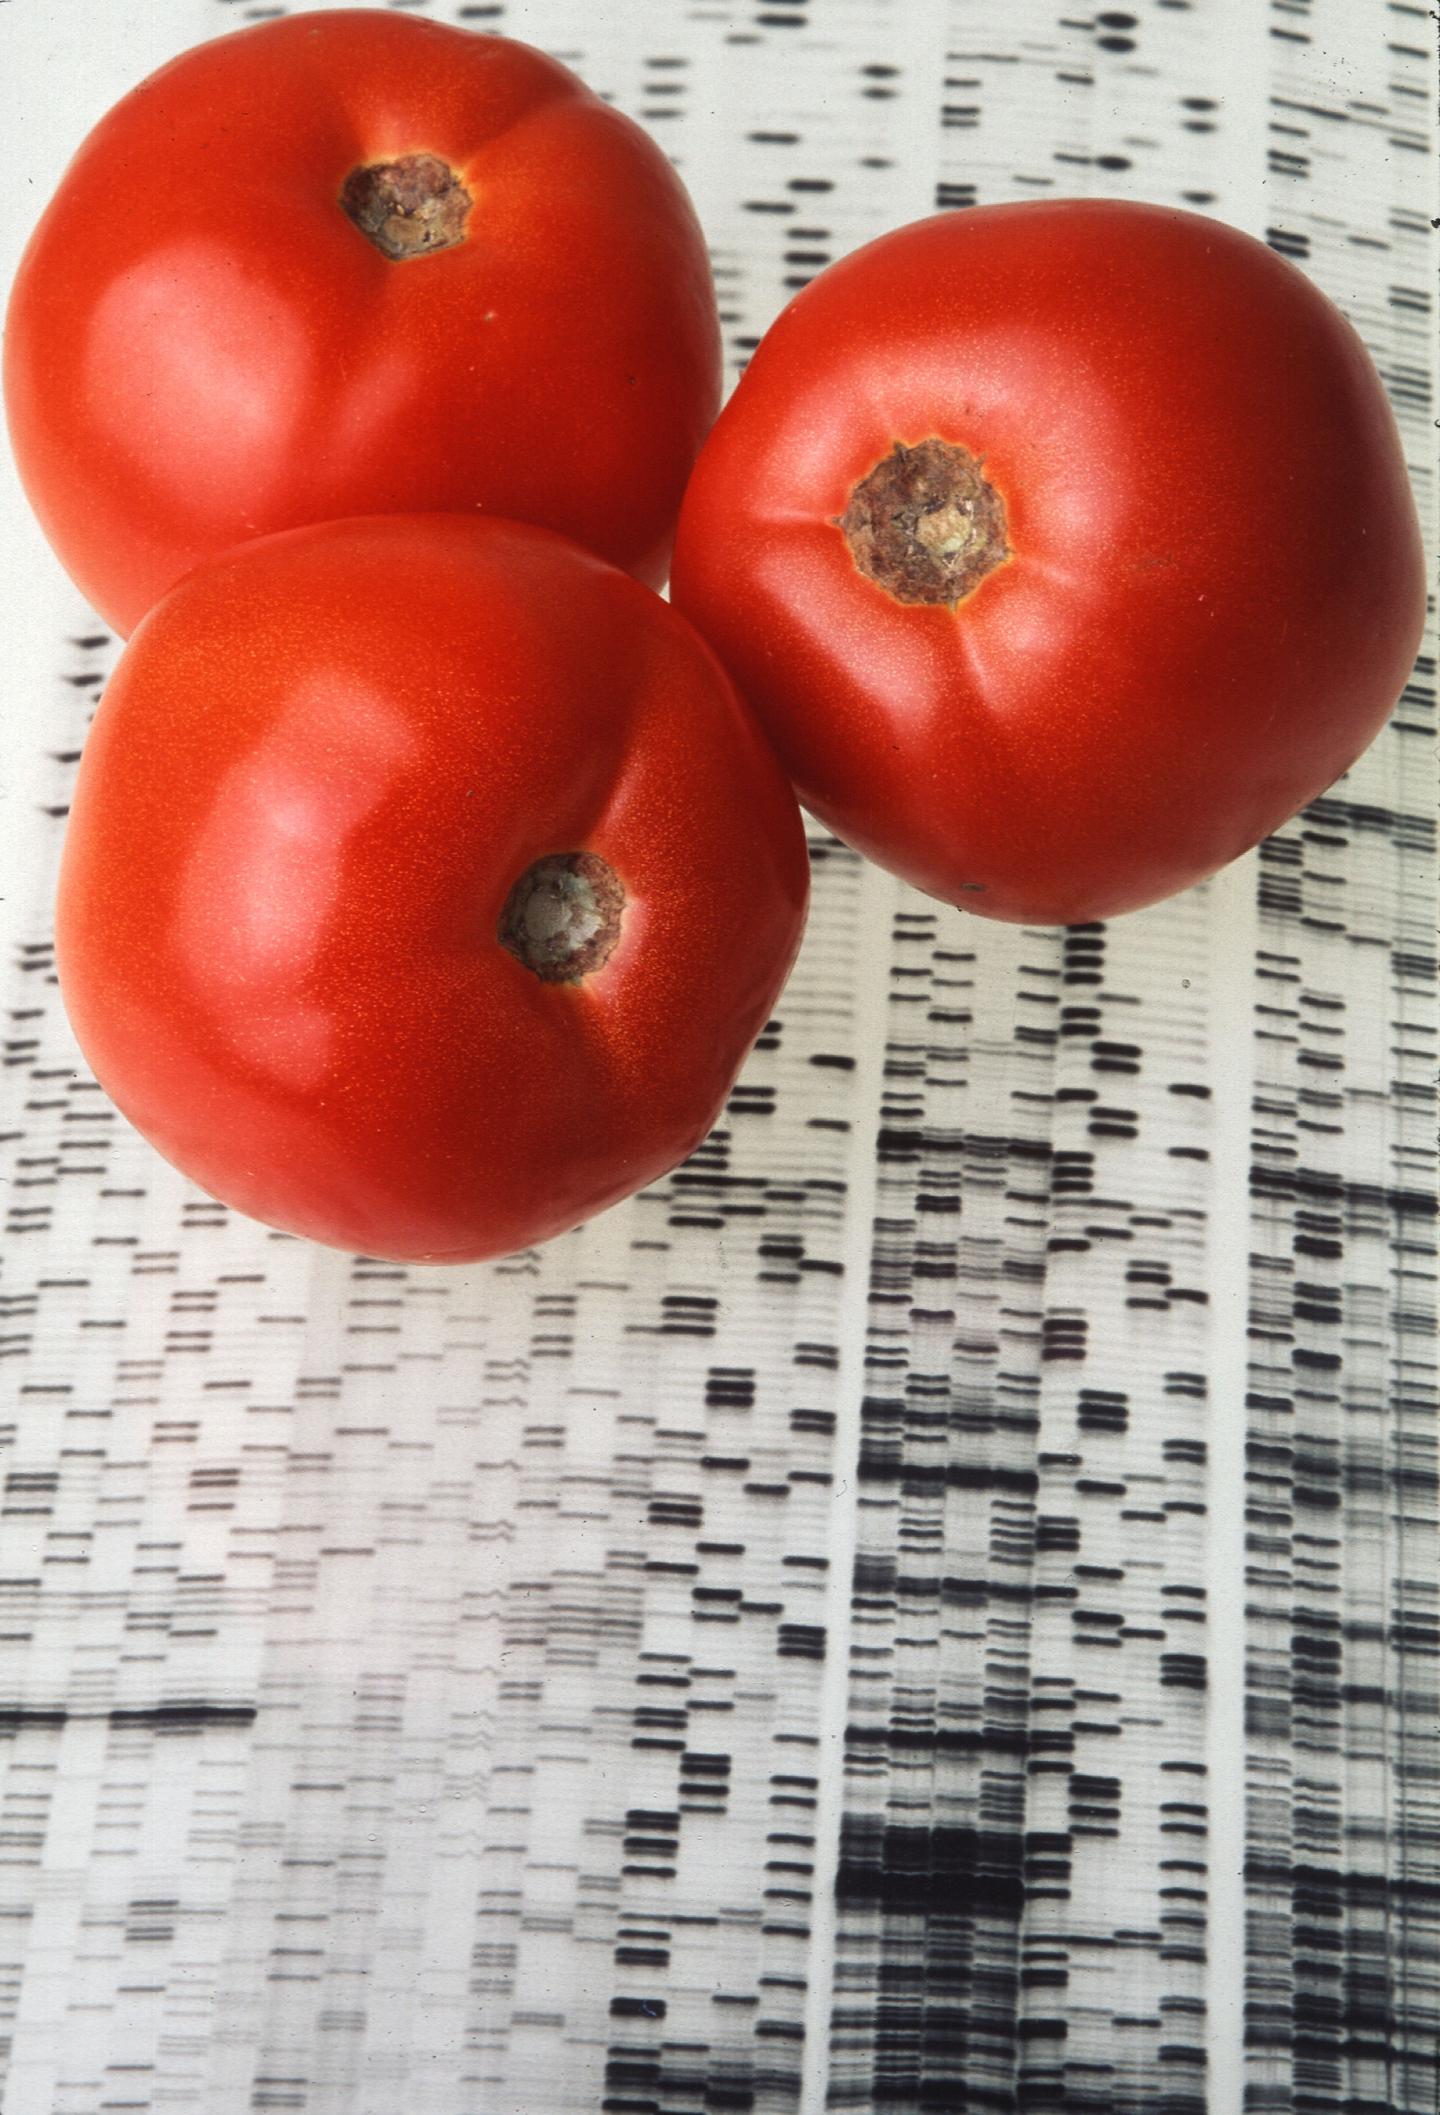 Tomato on a Genetic Scan